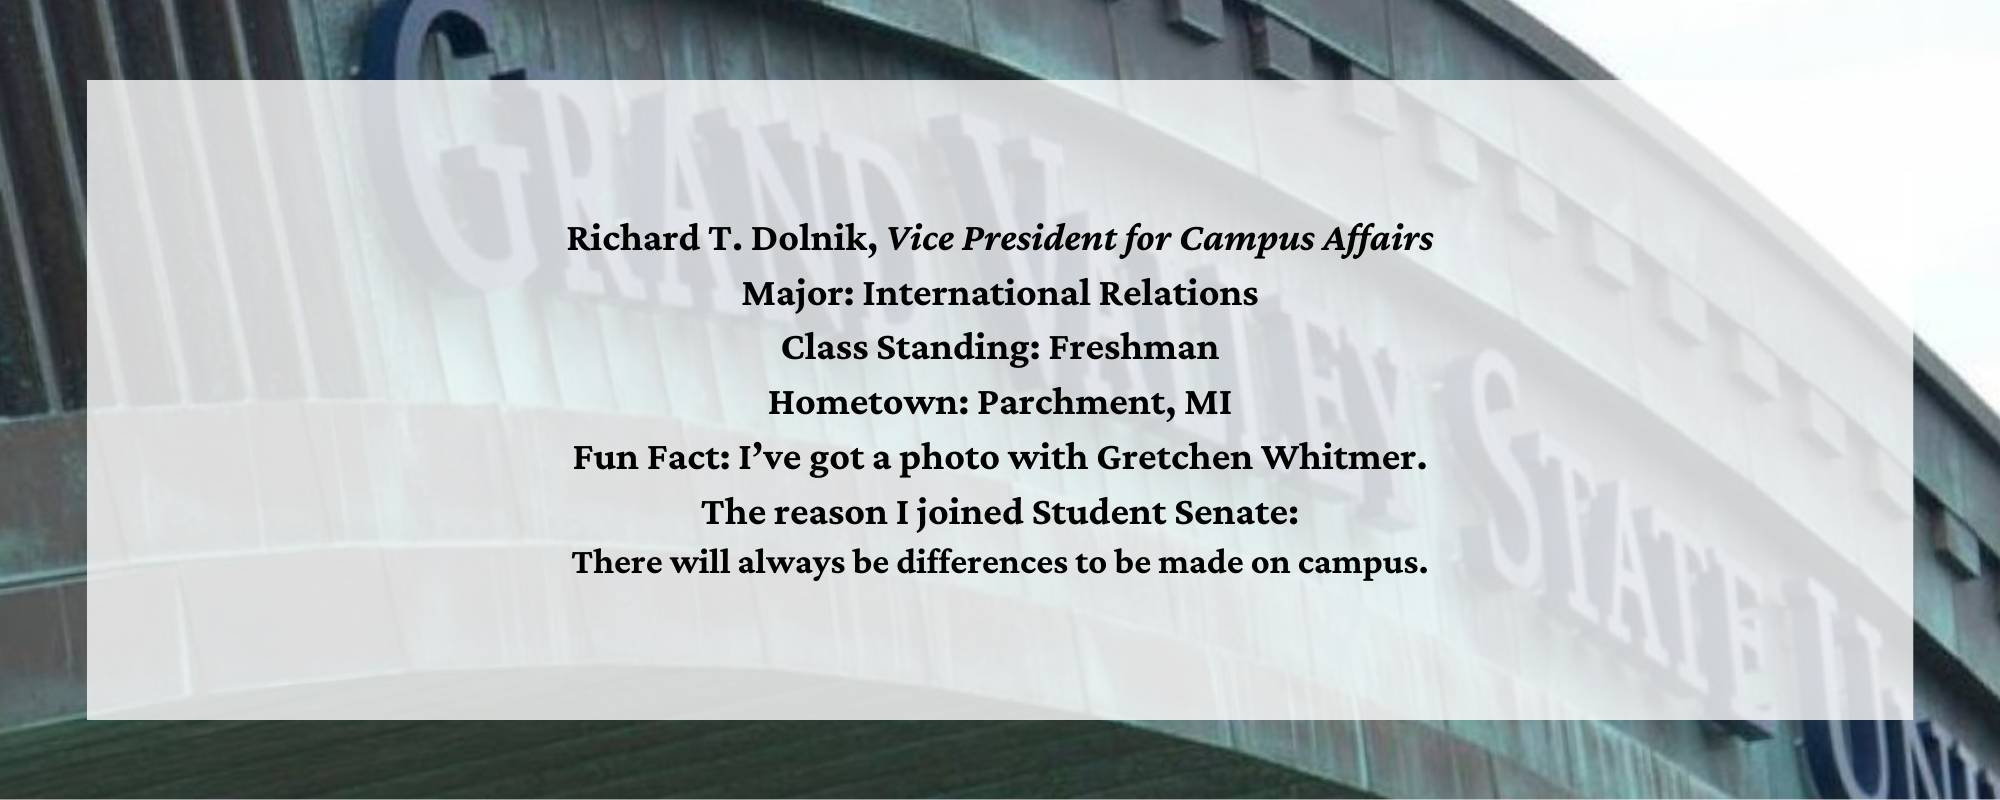 Richard T. Dolnik, Vice President for Campus Affairs. Major: International Relations. Class Standing: Freshman. Hometown: Parchment, MI. Fun Fact: I&#8217;ve got a photo with Gretchen Whitmer. The reason I joined Student Senate: There will always be differences to be made on campus.